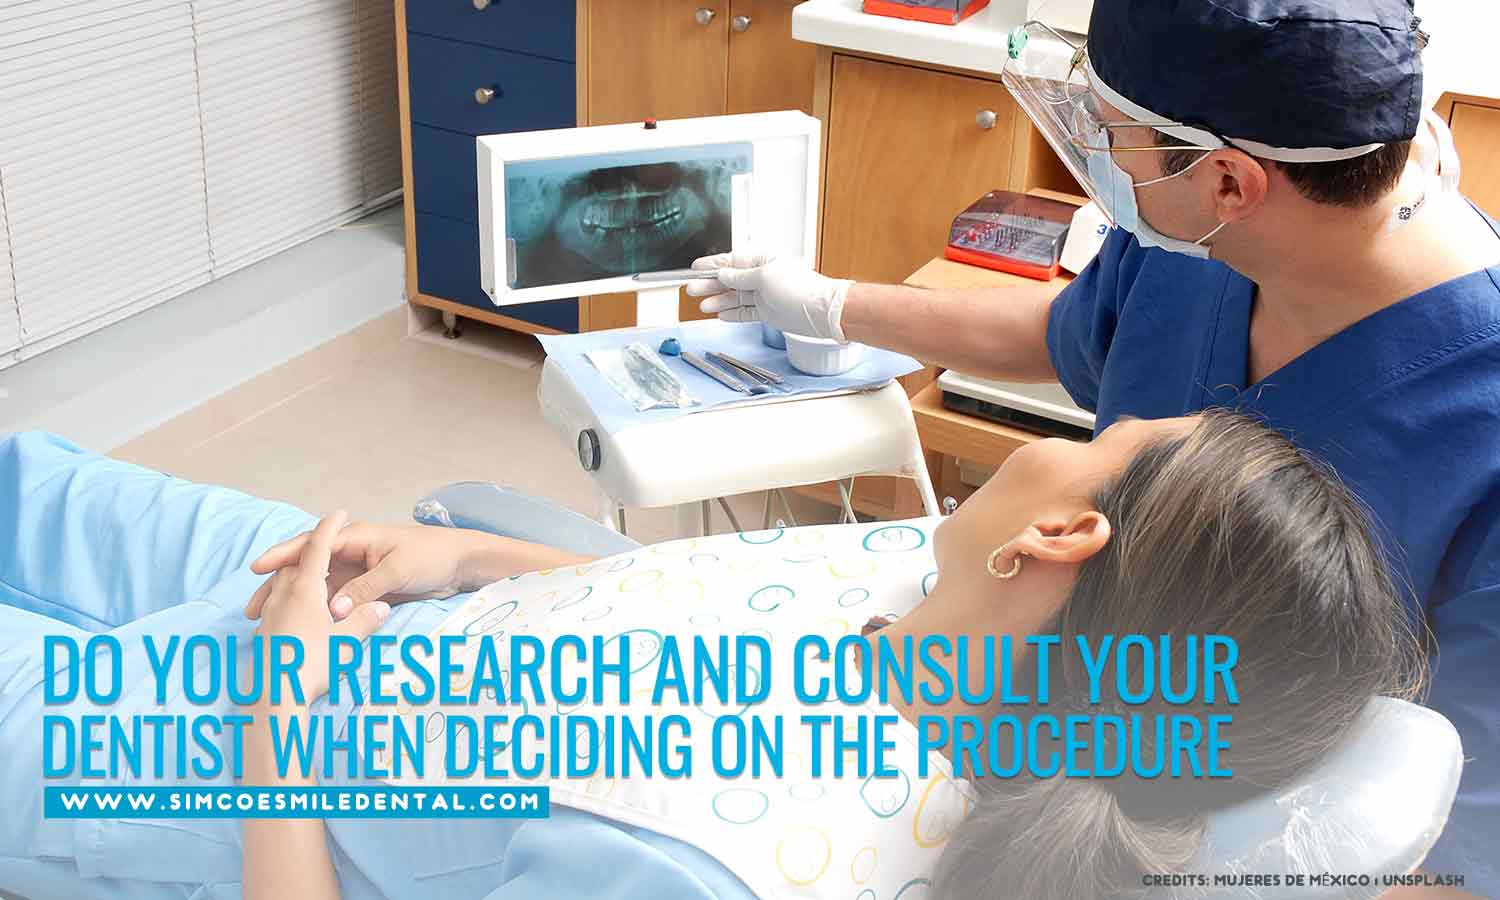 Do-your-research-and-consult-your-dentist-when-deciding-on-the-procedure Improve Your Smile with Cosmetic Dentistry